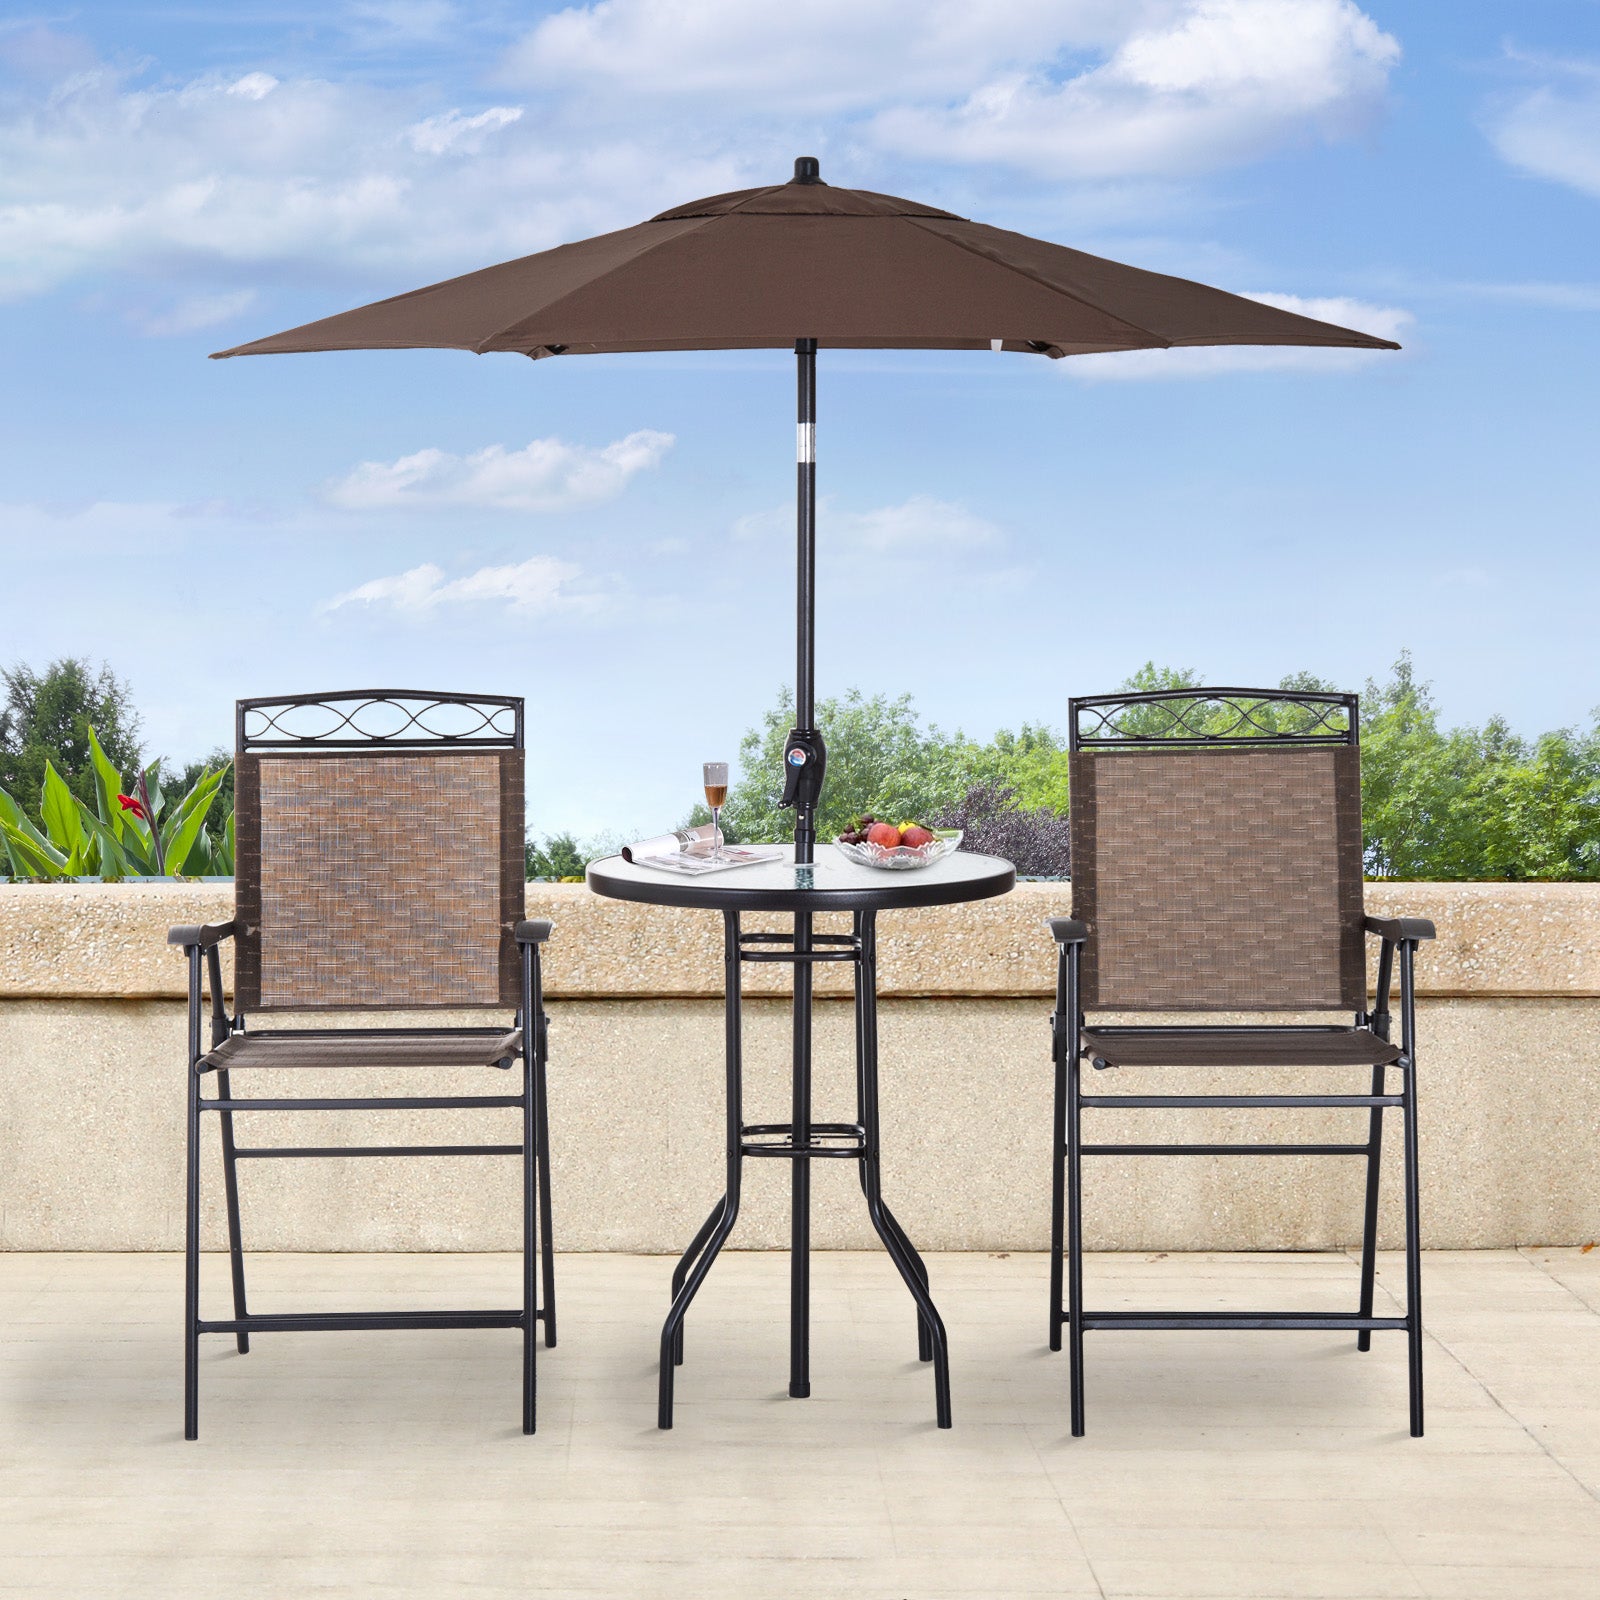 4 Piece Folding Outdoor Patio Pub Dining Table and Chairs Set with 6’ Adjustable Tilt Umbrella